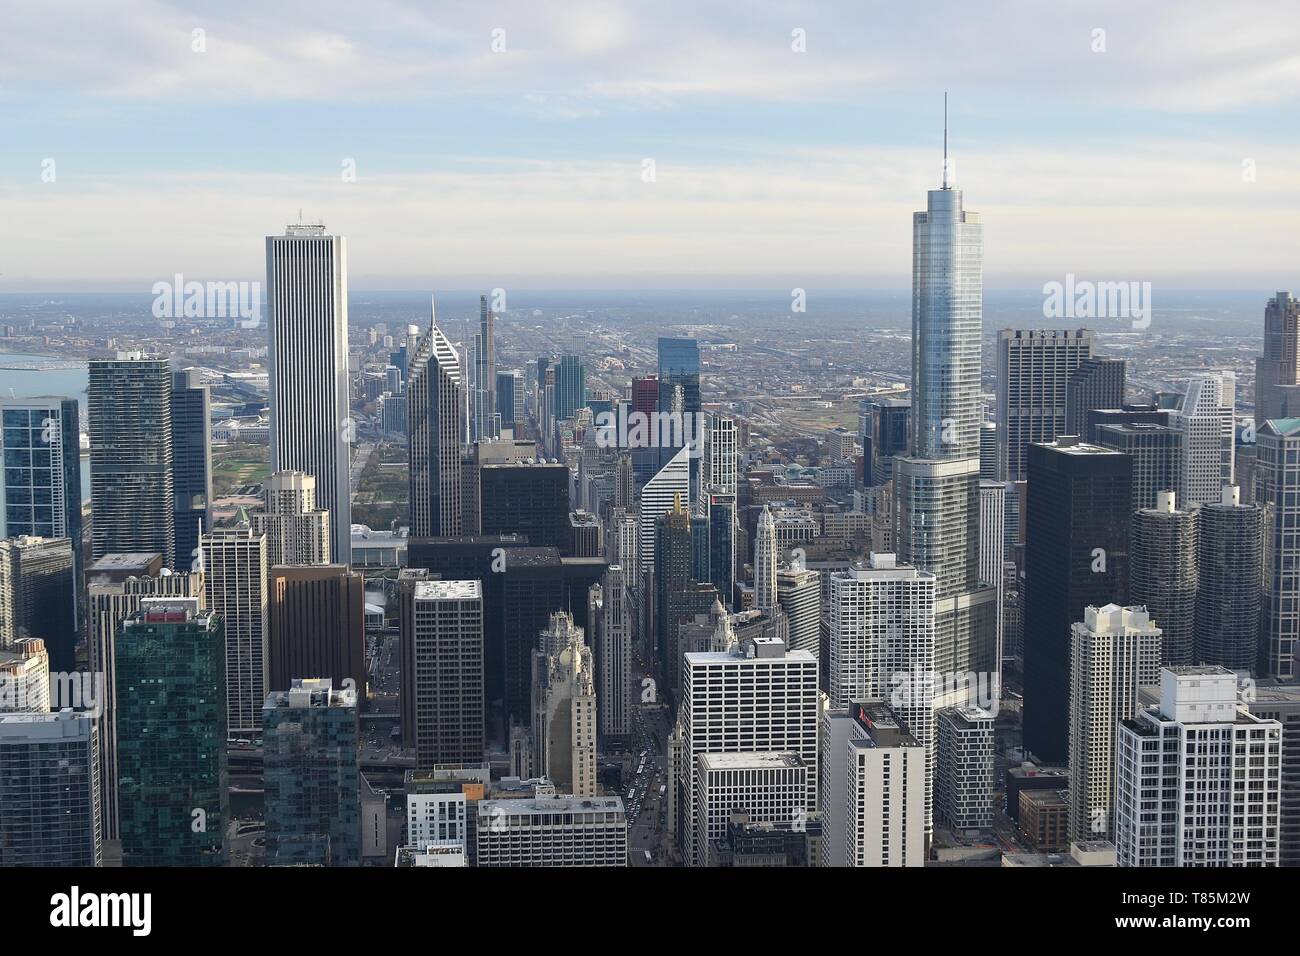 The Chicago skyline seen from 360 Chicago atop the John Hancock Center, Near North Loop, Magnificent Mile, Chicago, Illinois, USA Stock Photo